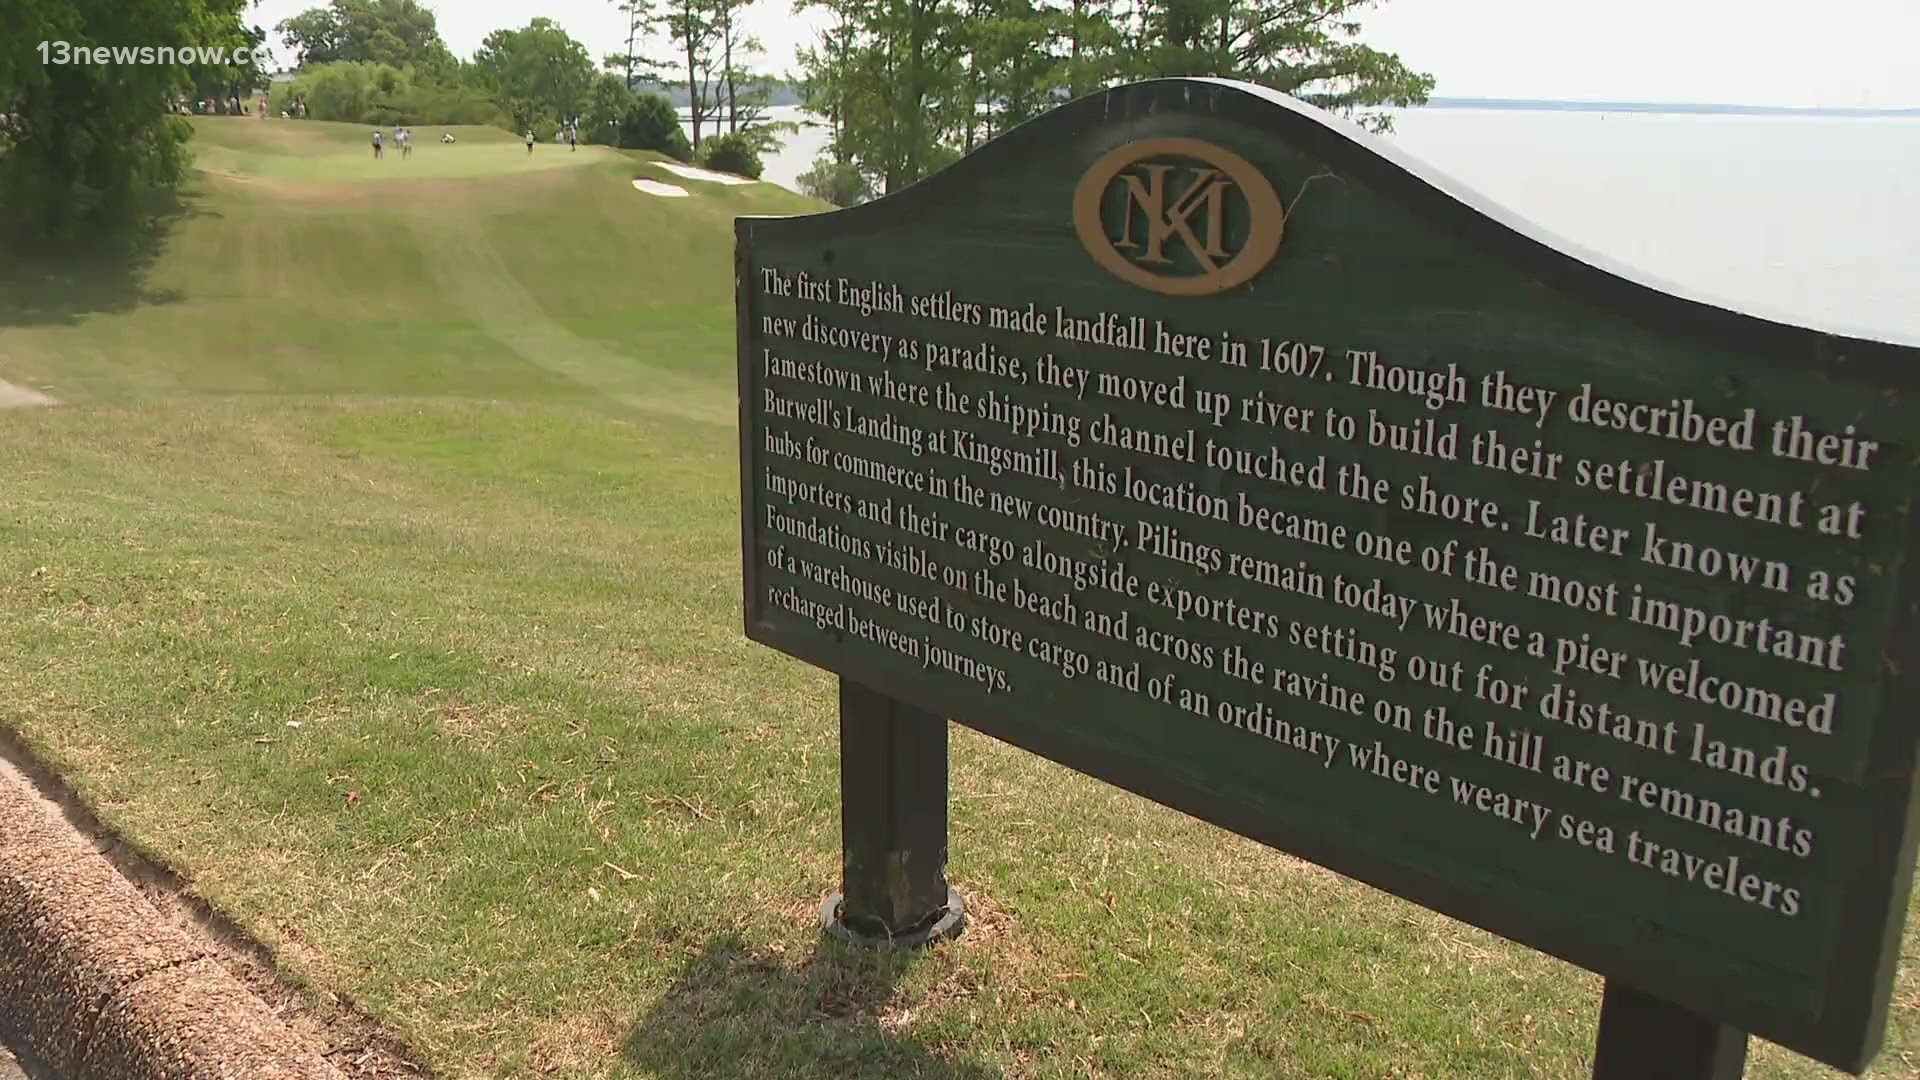 Kingsmill is where British settlers landed for the first time in 1607. It's the setting of a beautiful golf course now, but the settlers saw the area differently.